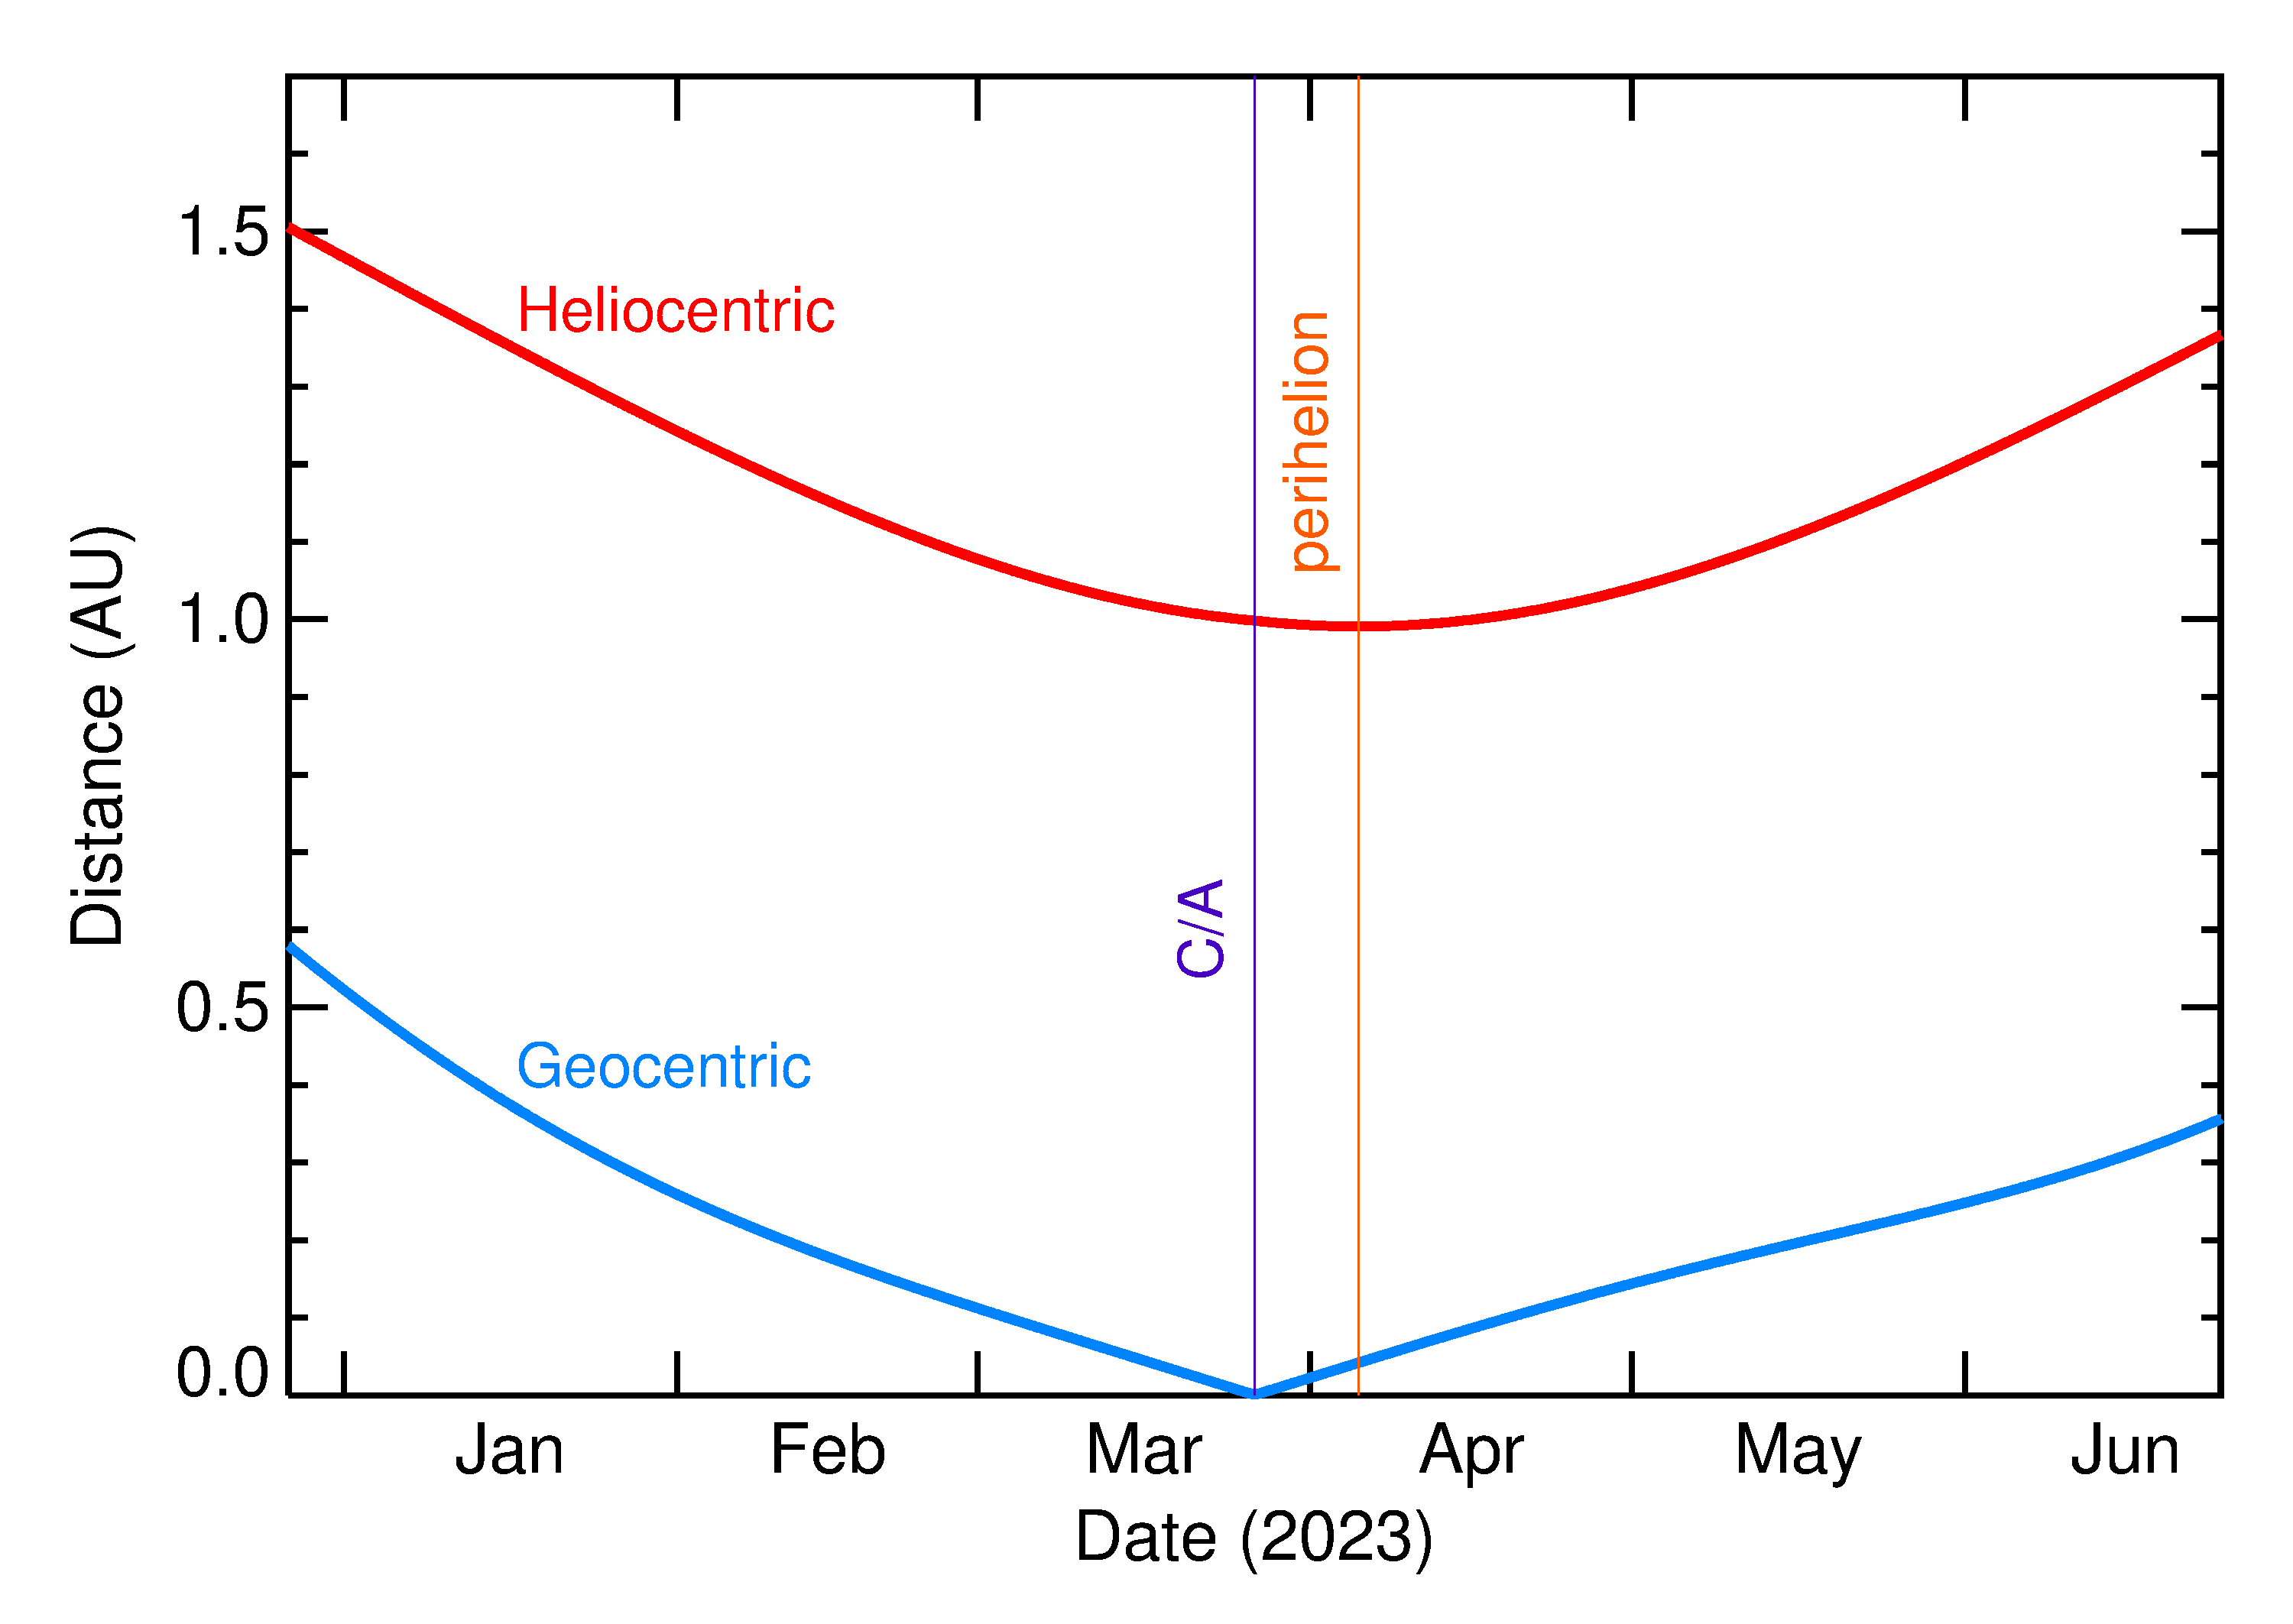 Heliocentric and Geocentric Distances of 2023 DZ2 in the months around closest approach